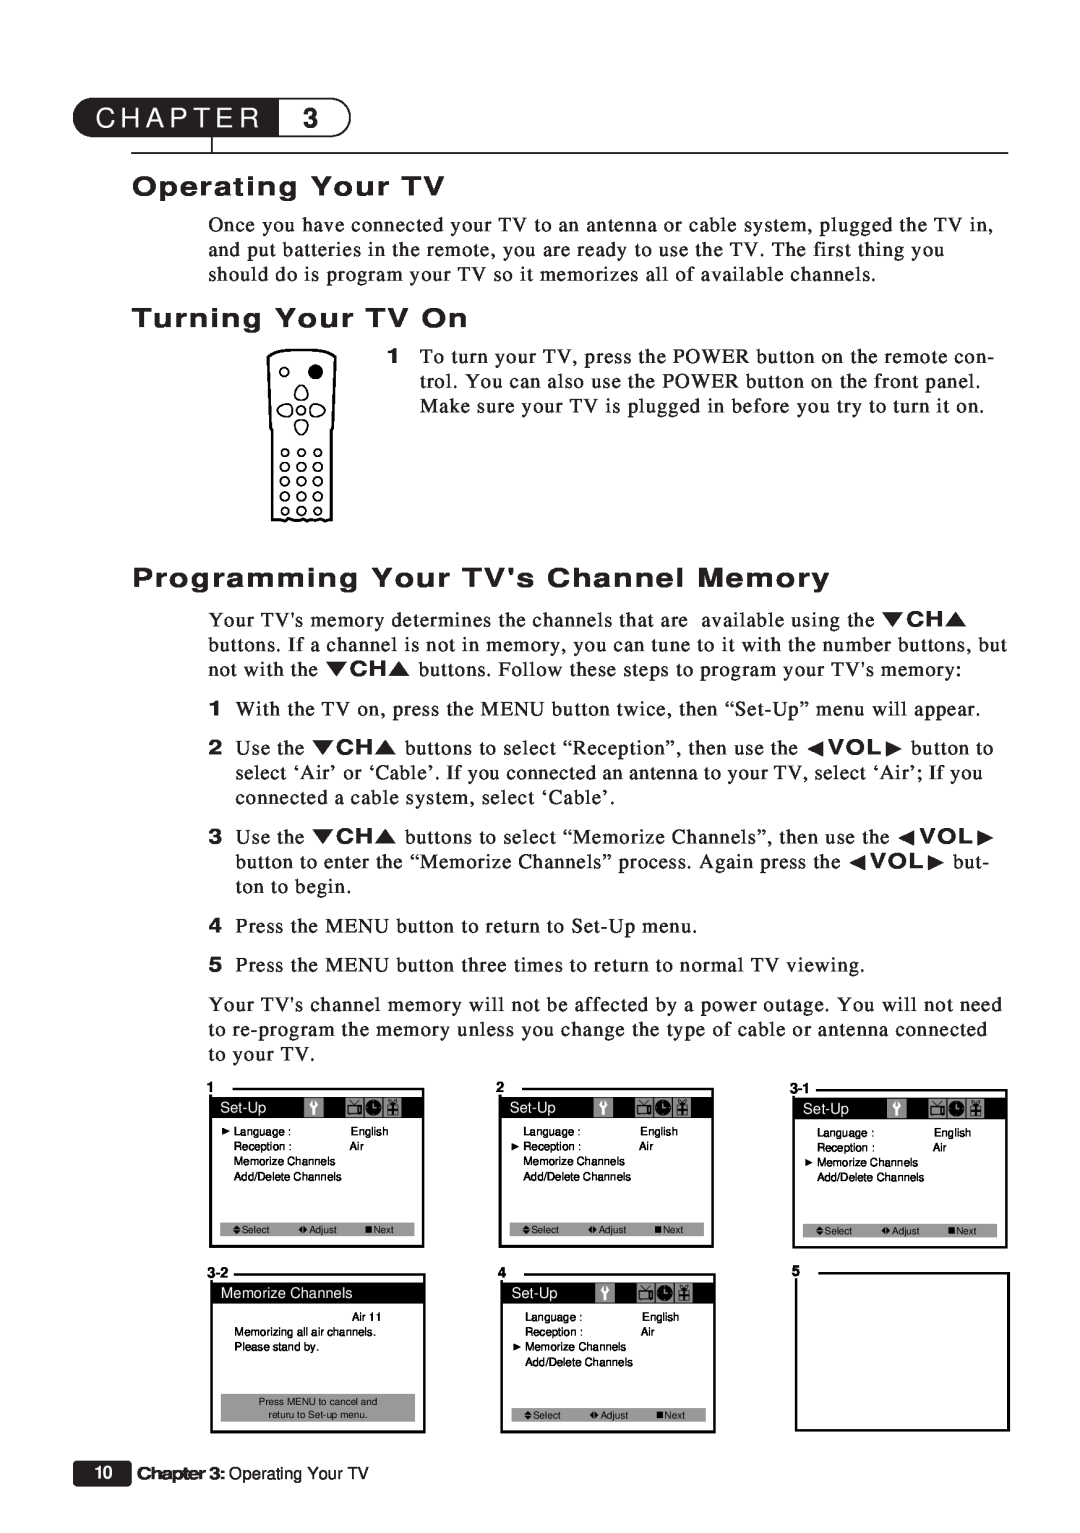 Daewoo ET 13P2, ET 19P2 Operating Your TV, Turning Your TV On, Programming Your TVs Channel Memory, C H A P T E R 